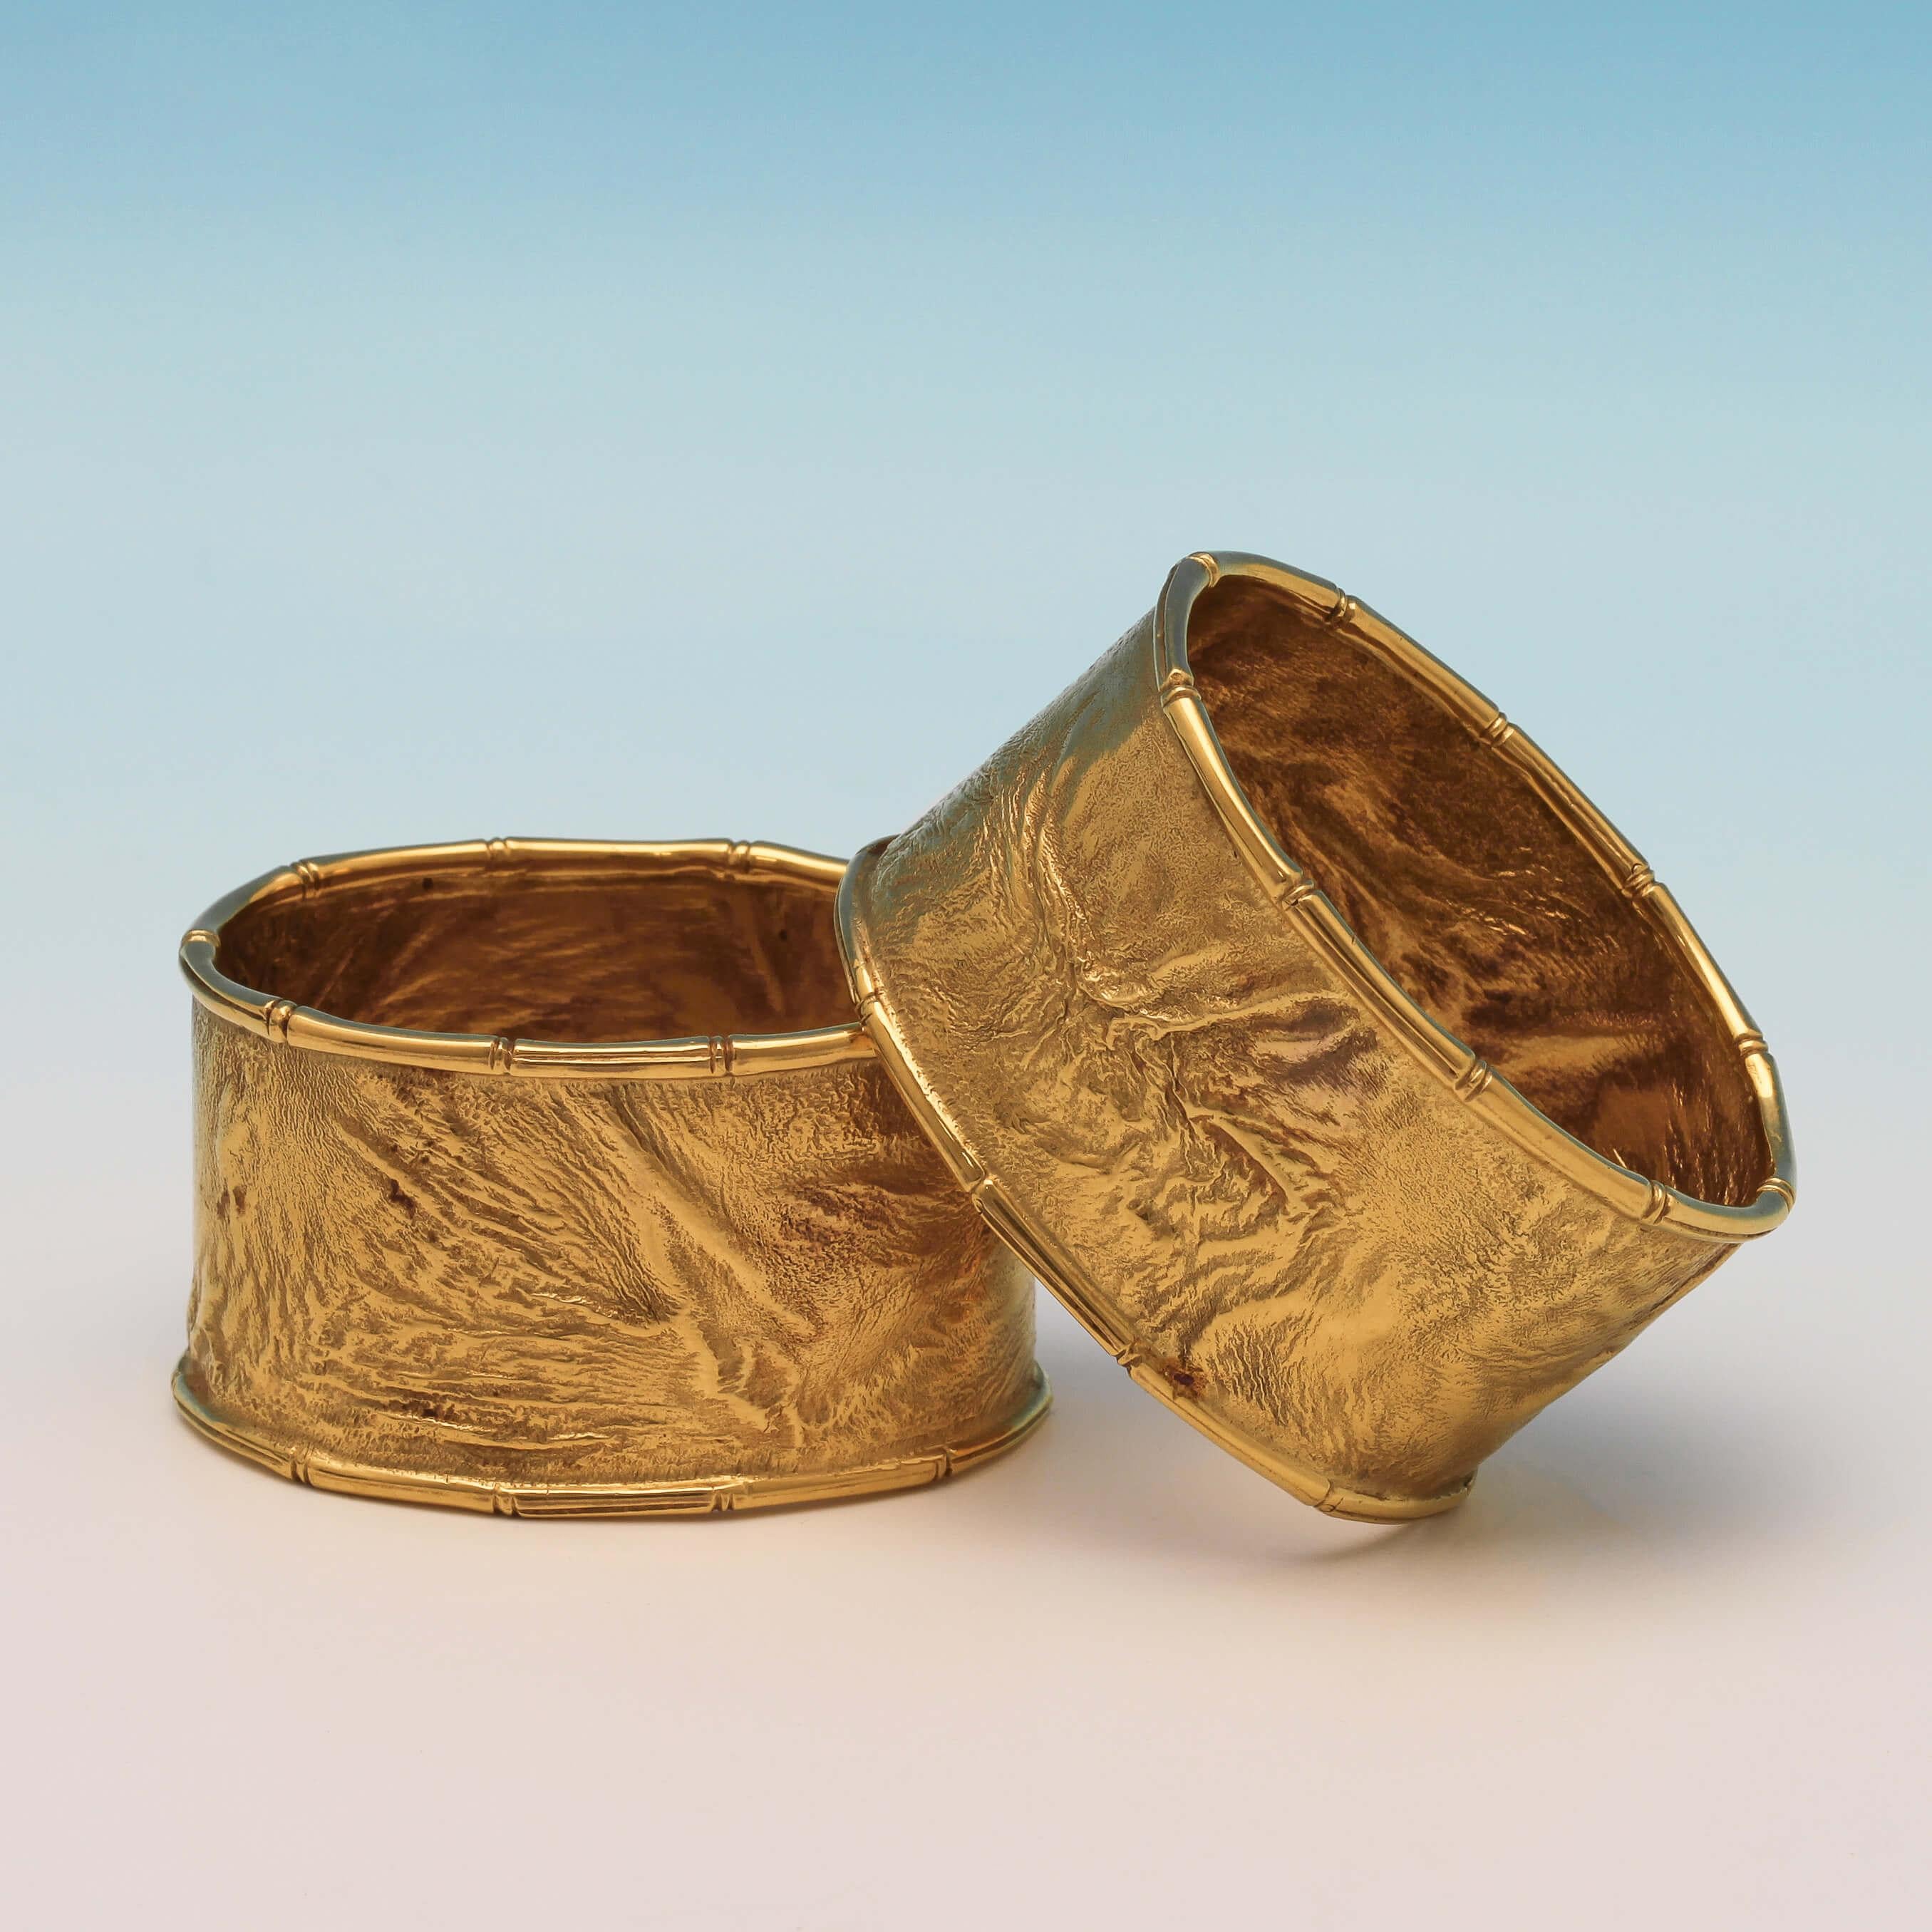 Made in London in 1970 by Ramsden & Roed, and retailed by Alfred Dunhill Ltd., this very stylish, boxed pair of 9-carat gold napkin rings, are made using a Samorodok technique which results in a natural looking molten finish to the surface. This